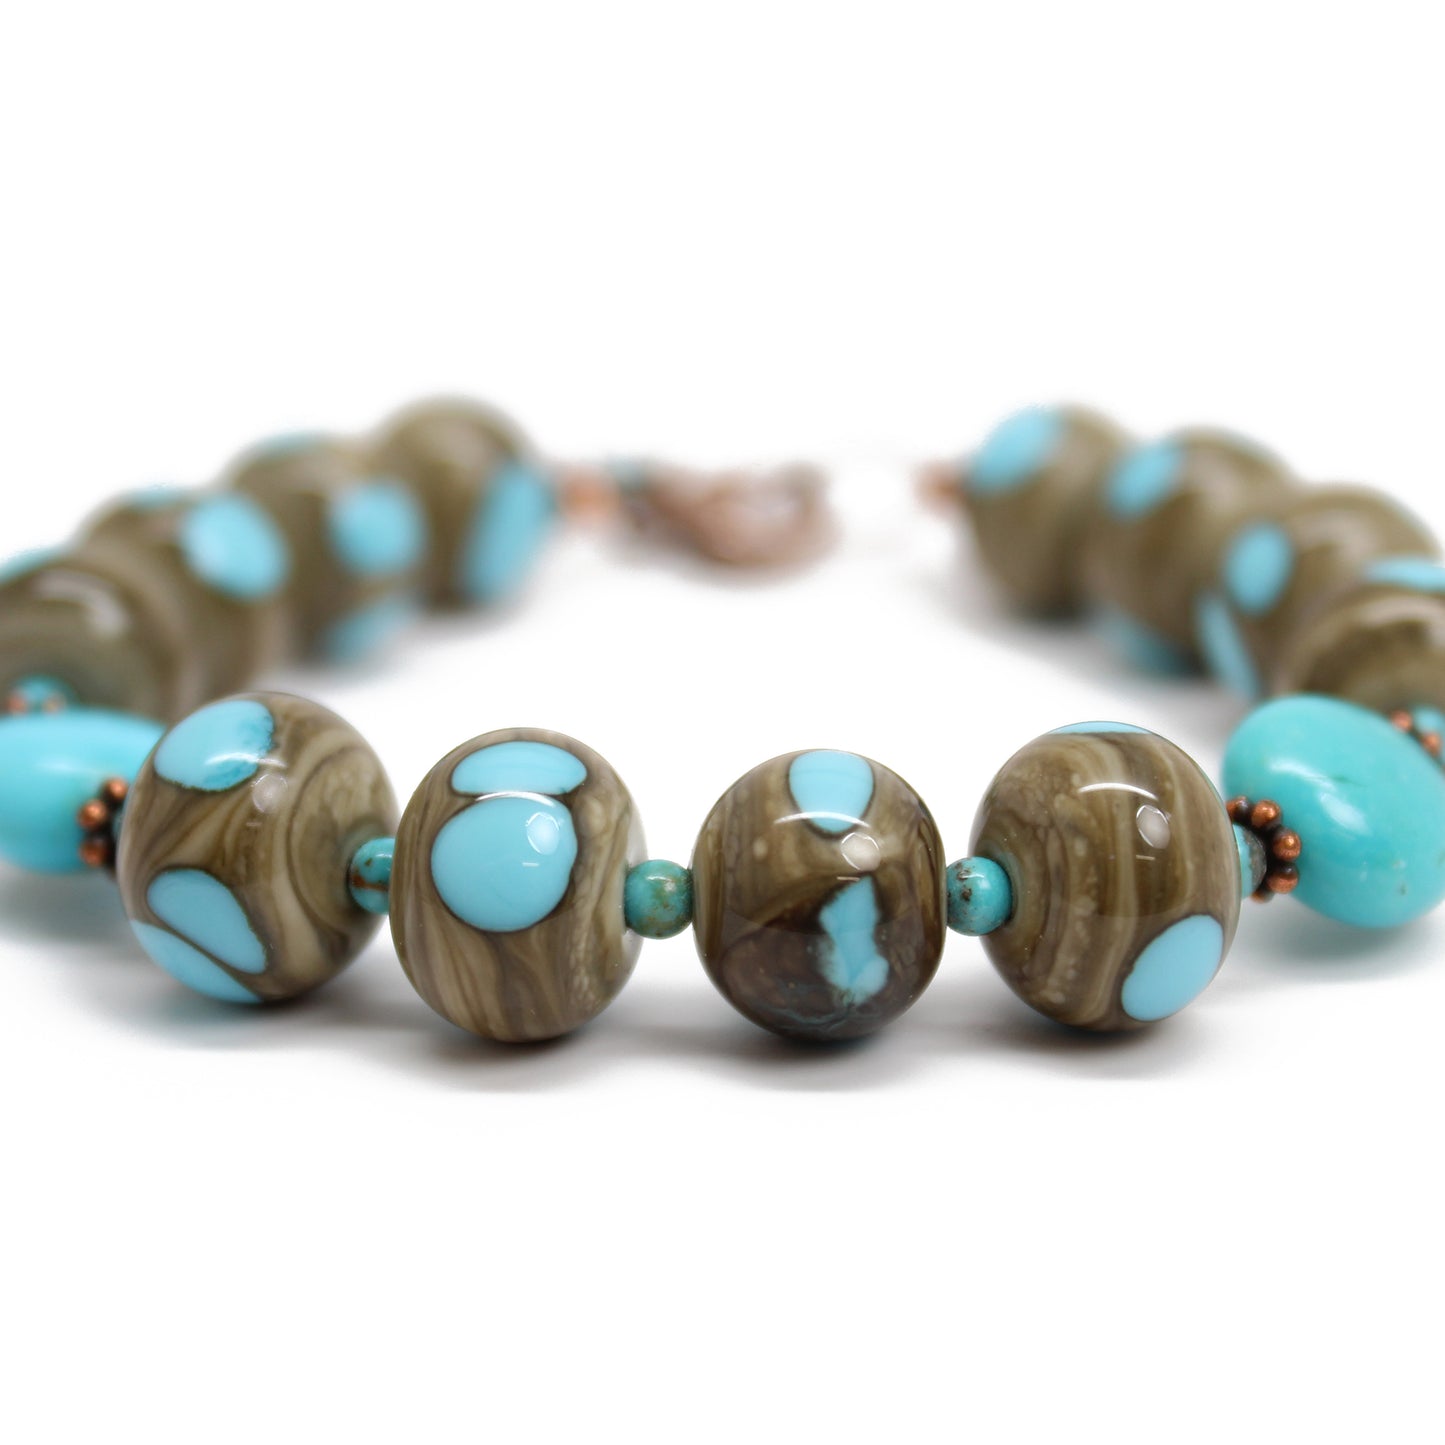 Turquoise and Lampwork Bead Bracelet